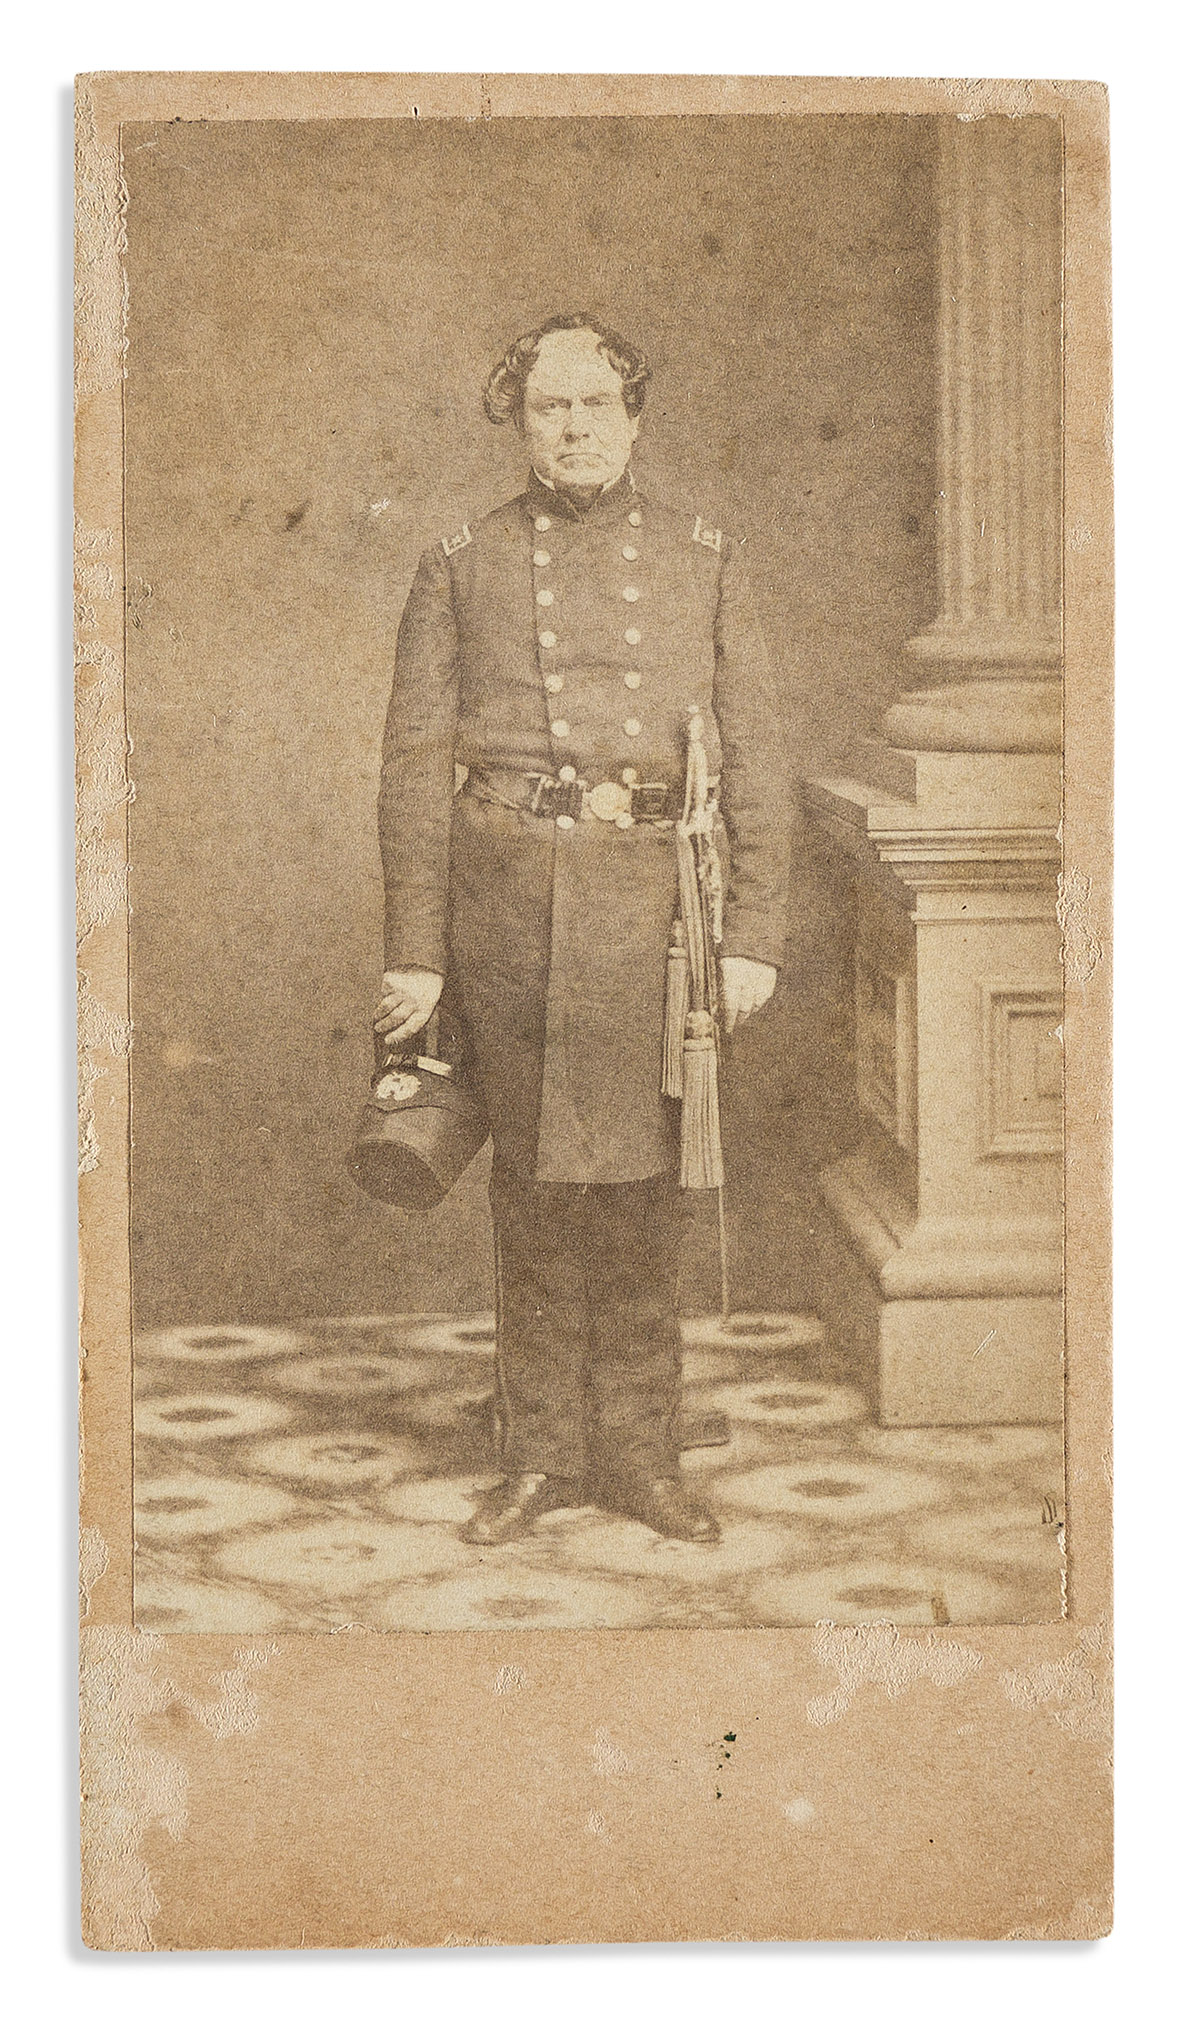 (CIVIL WAR--CONFEDERATE.) Carte-de-visite portrait of the noted Confederate engineer Walter Gwynn, with related family papers.